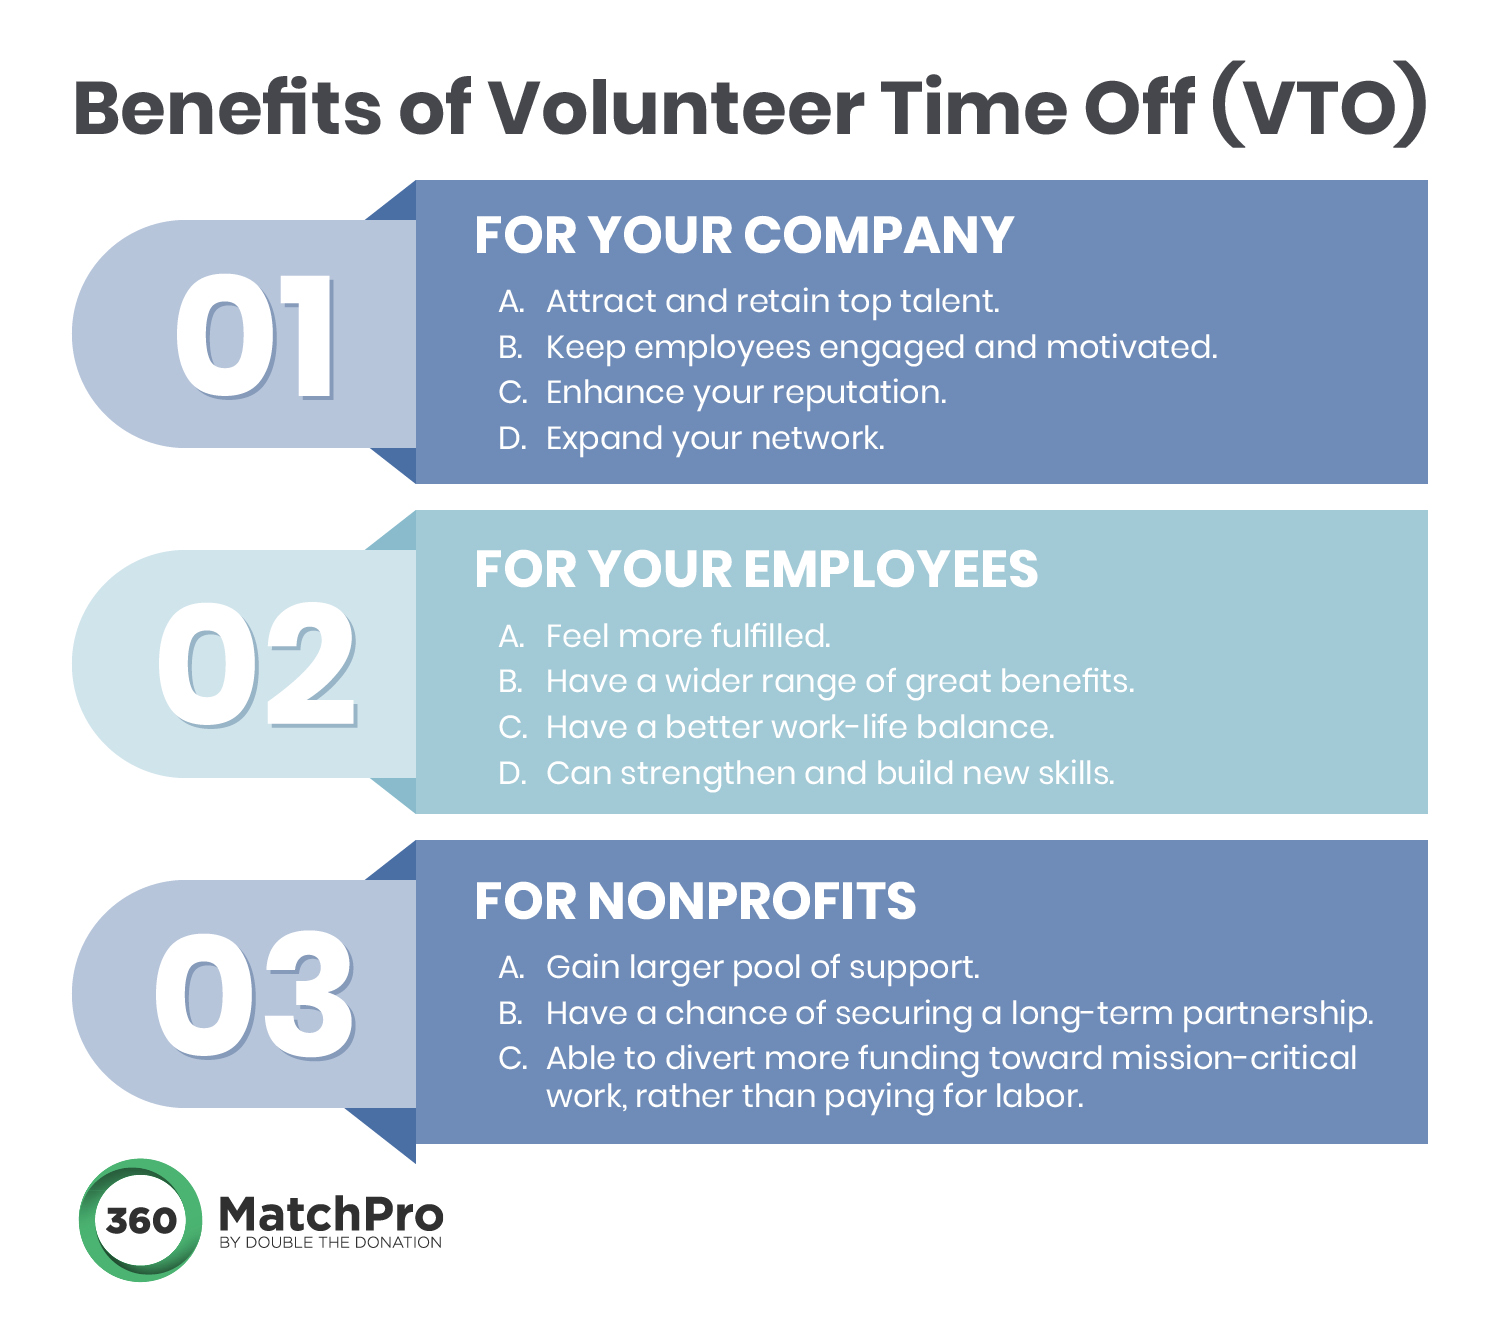 The benefits of volunteer time off programs for your company, employees, and nonprofits (detailed in text below).